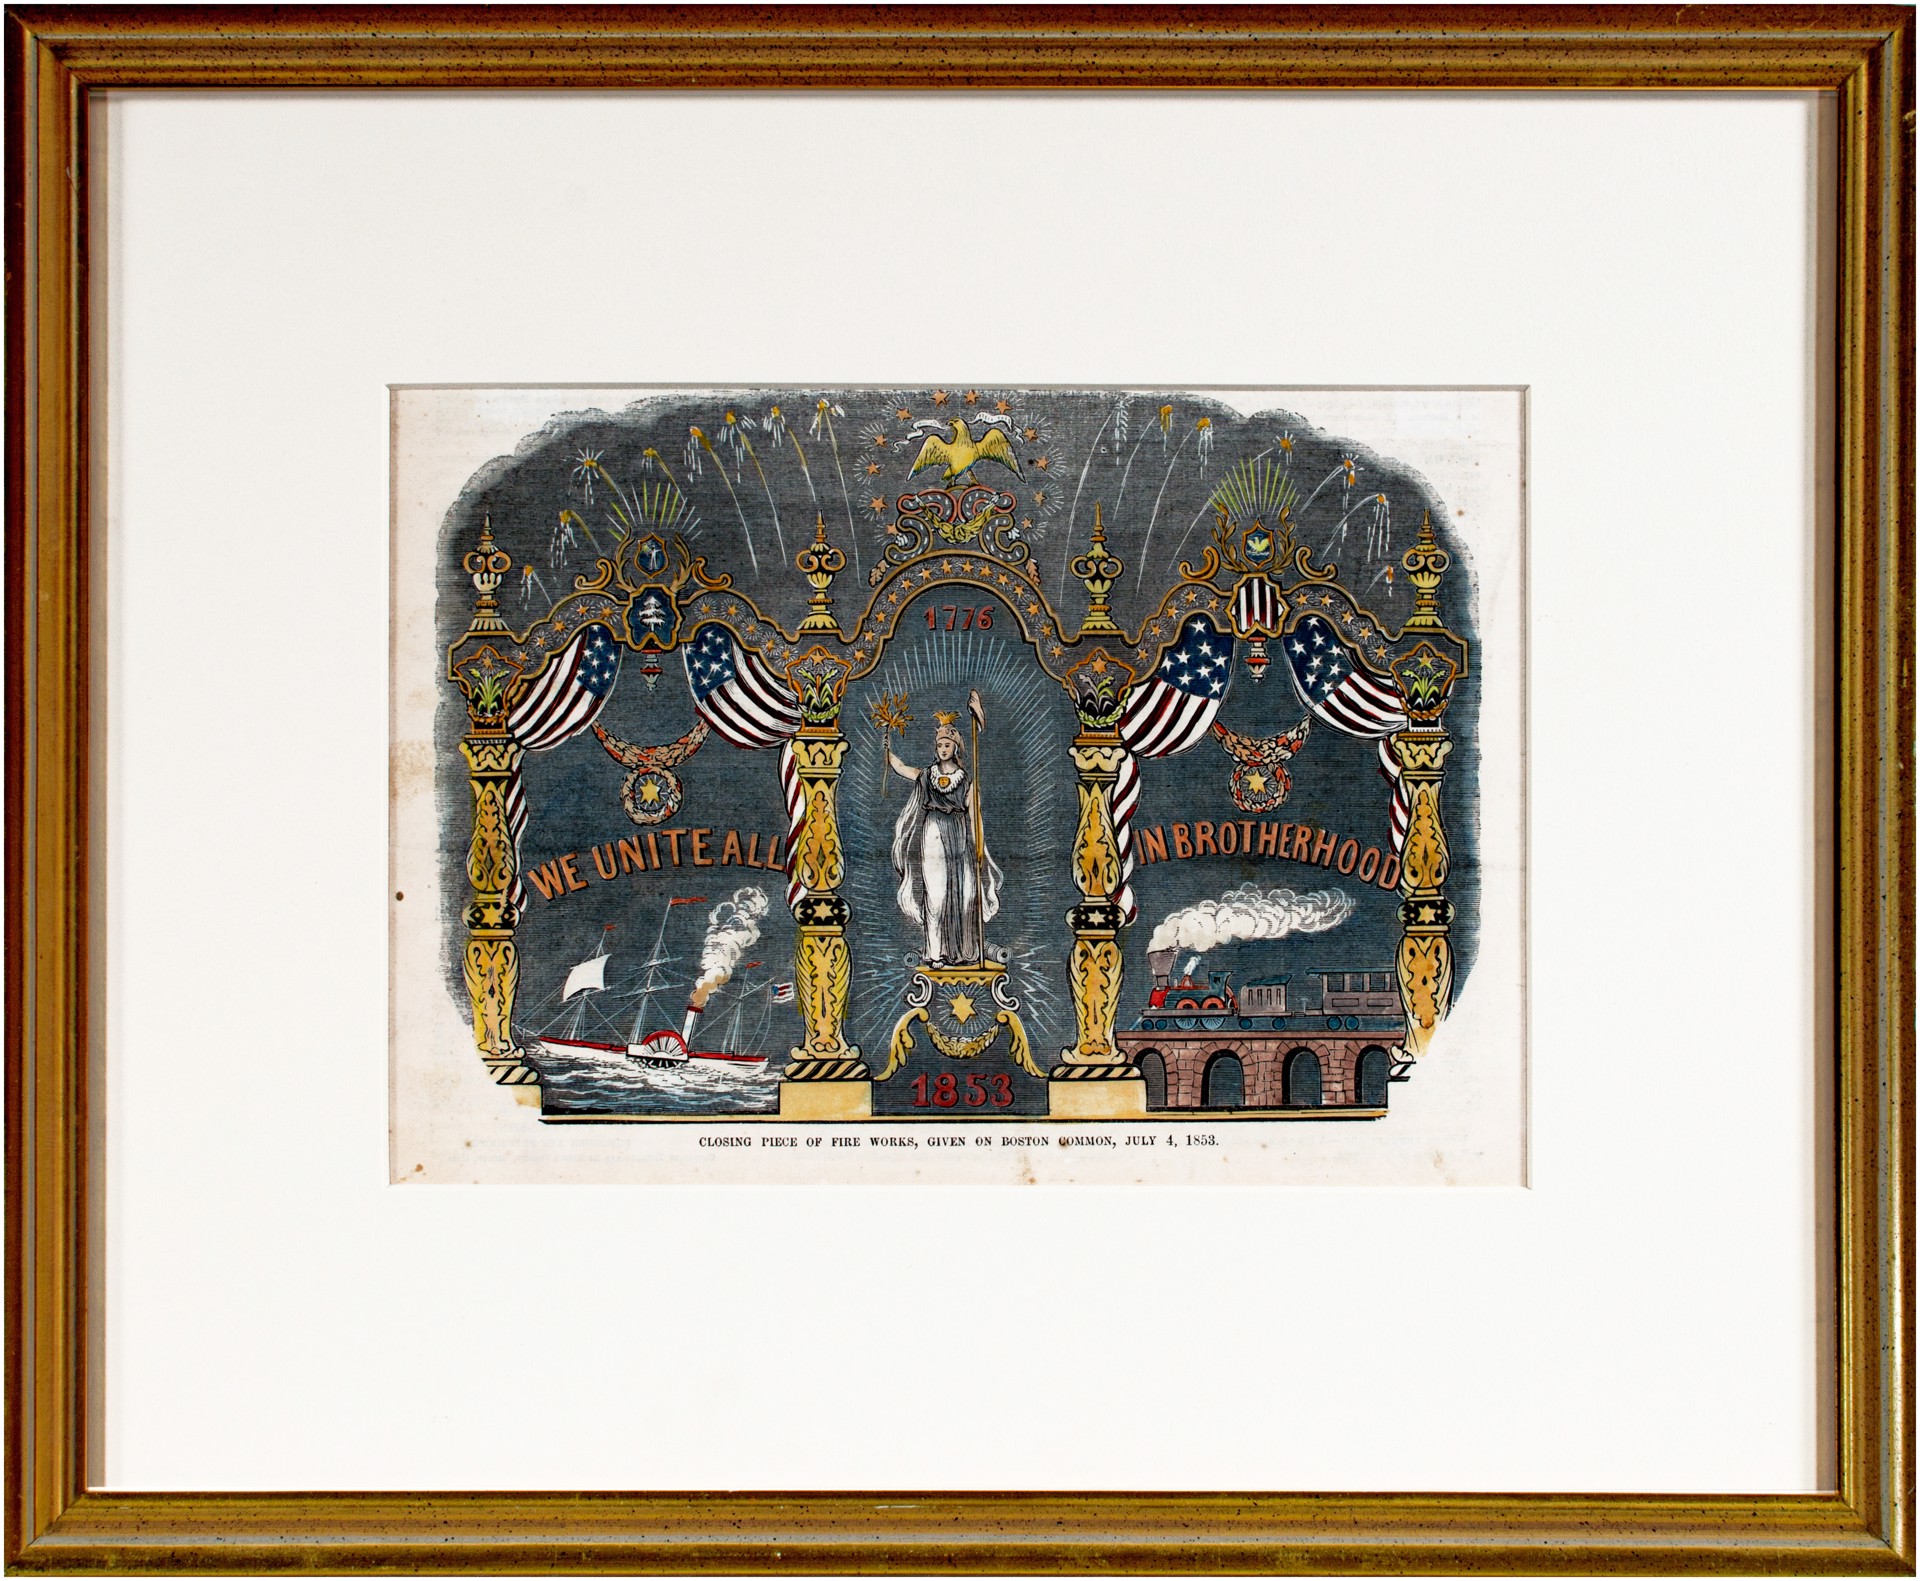 Closing Piece of Fire Works, Given on Boston Common, July 4, 1853 by Unknown